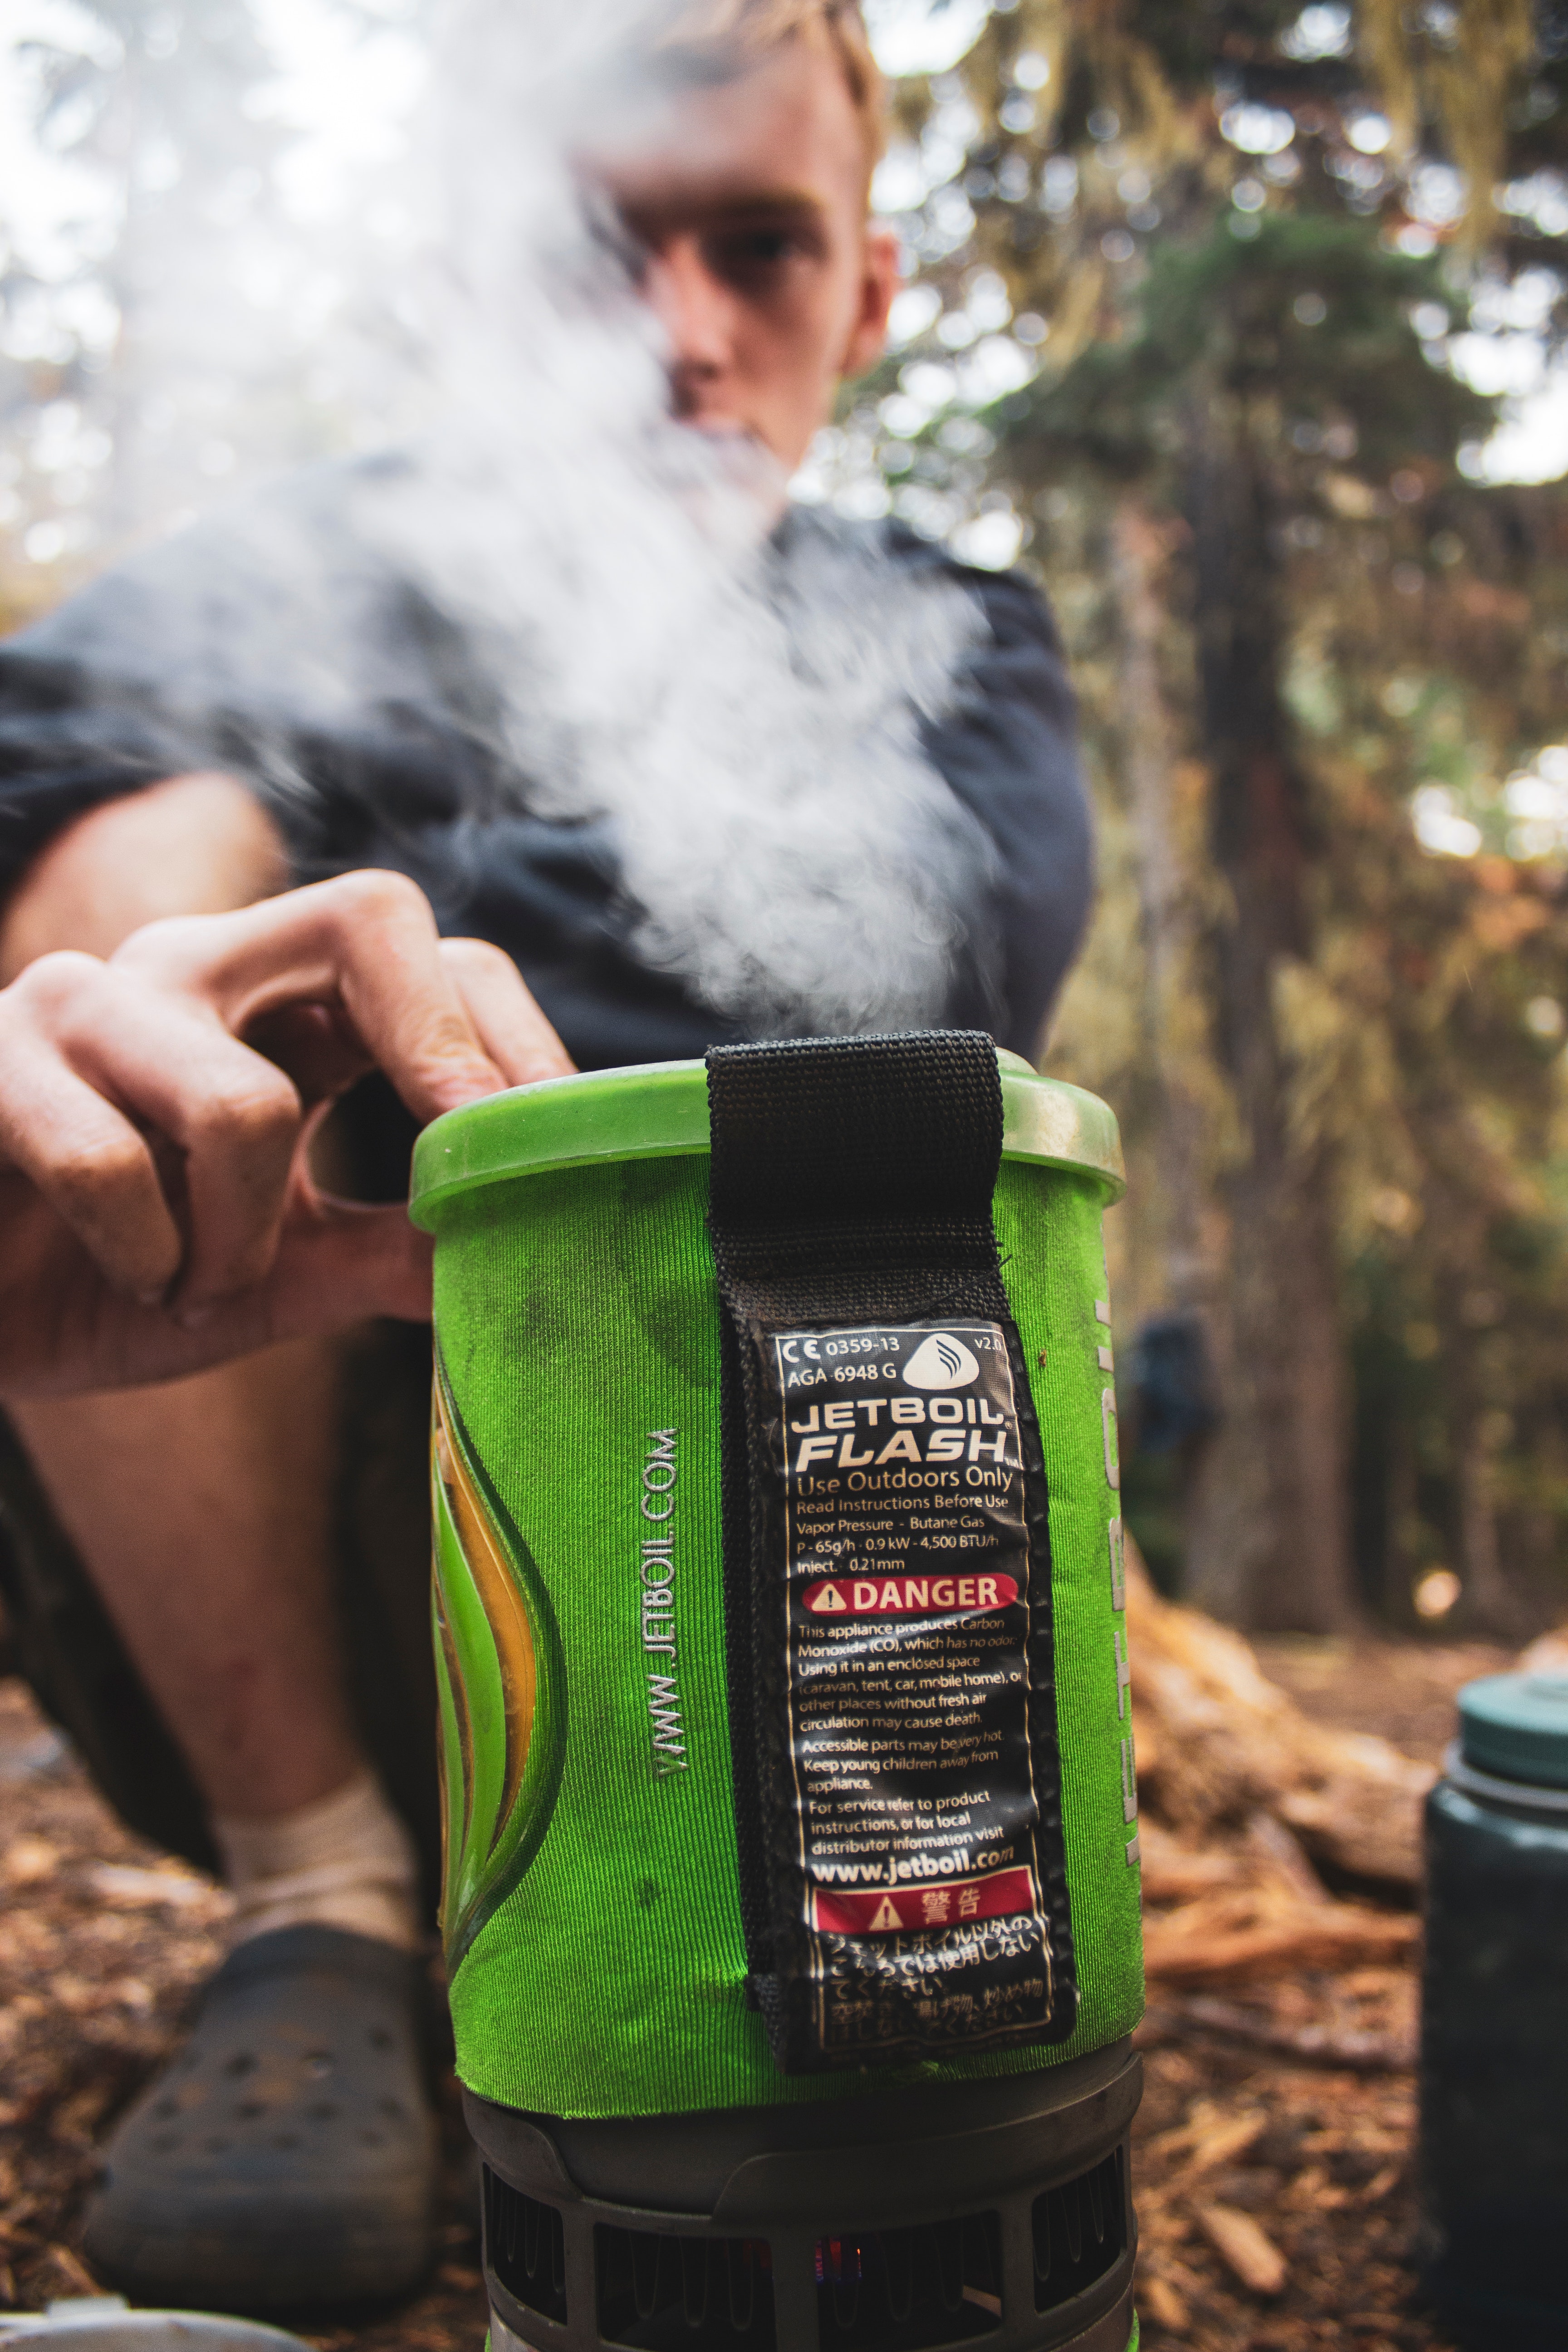 Camping stoves are easy to carry in your emergency kit. 